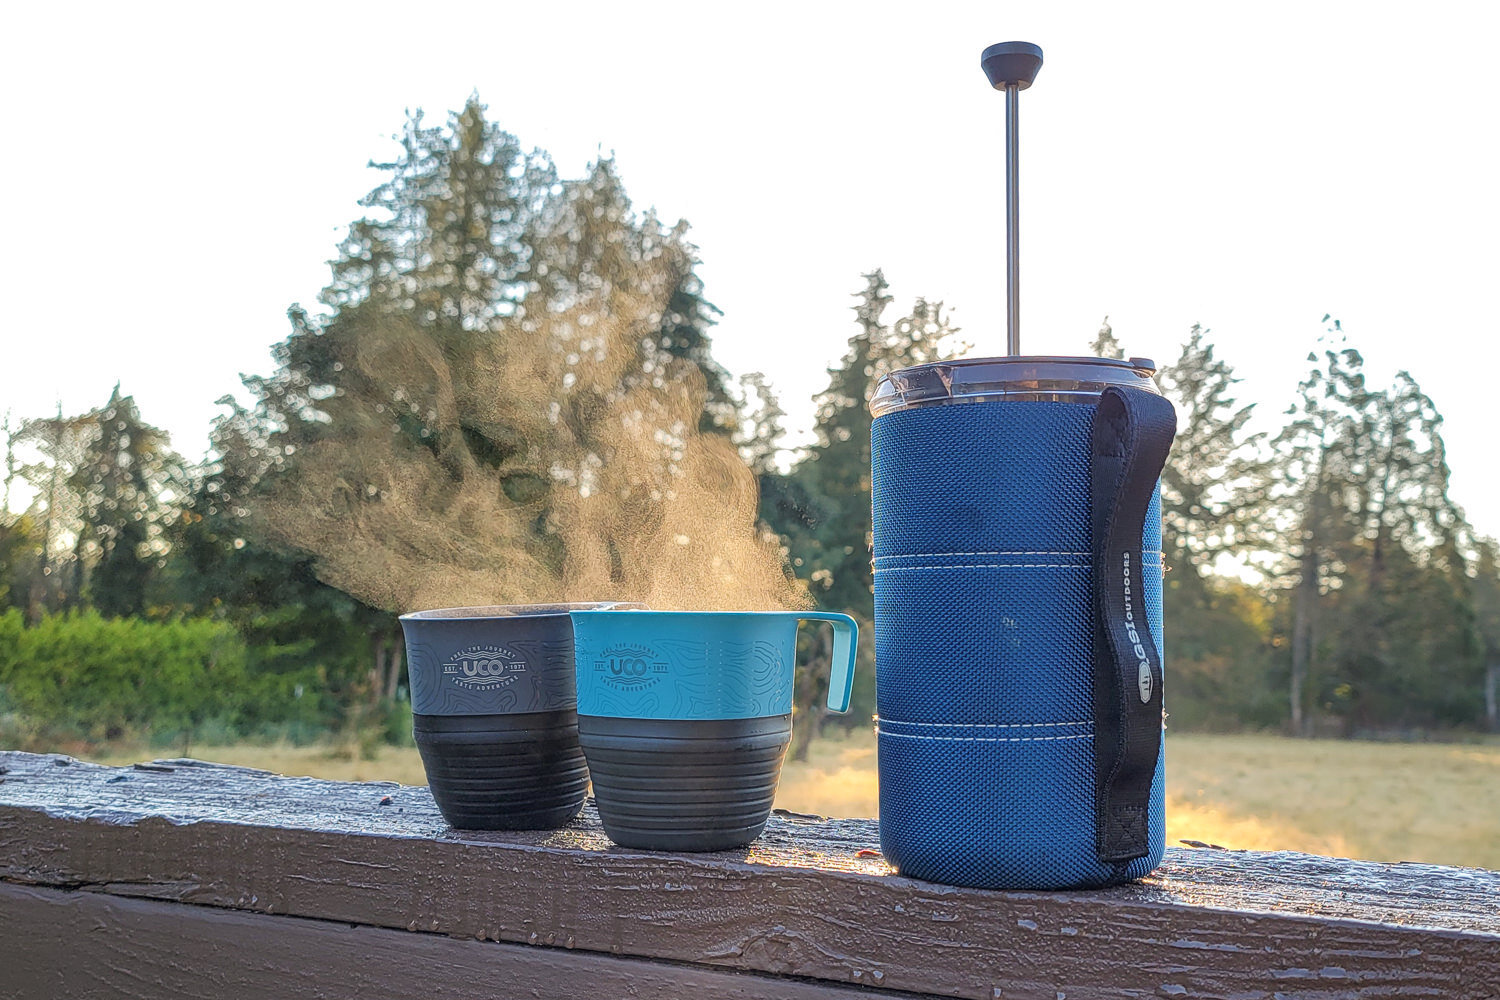 The GSI Outdoors Java Press is durable & makes great, strong coffee